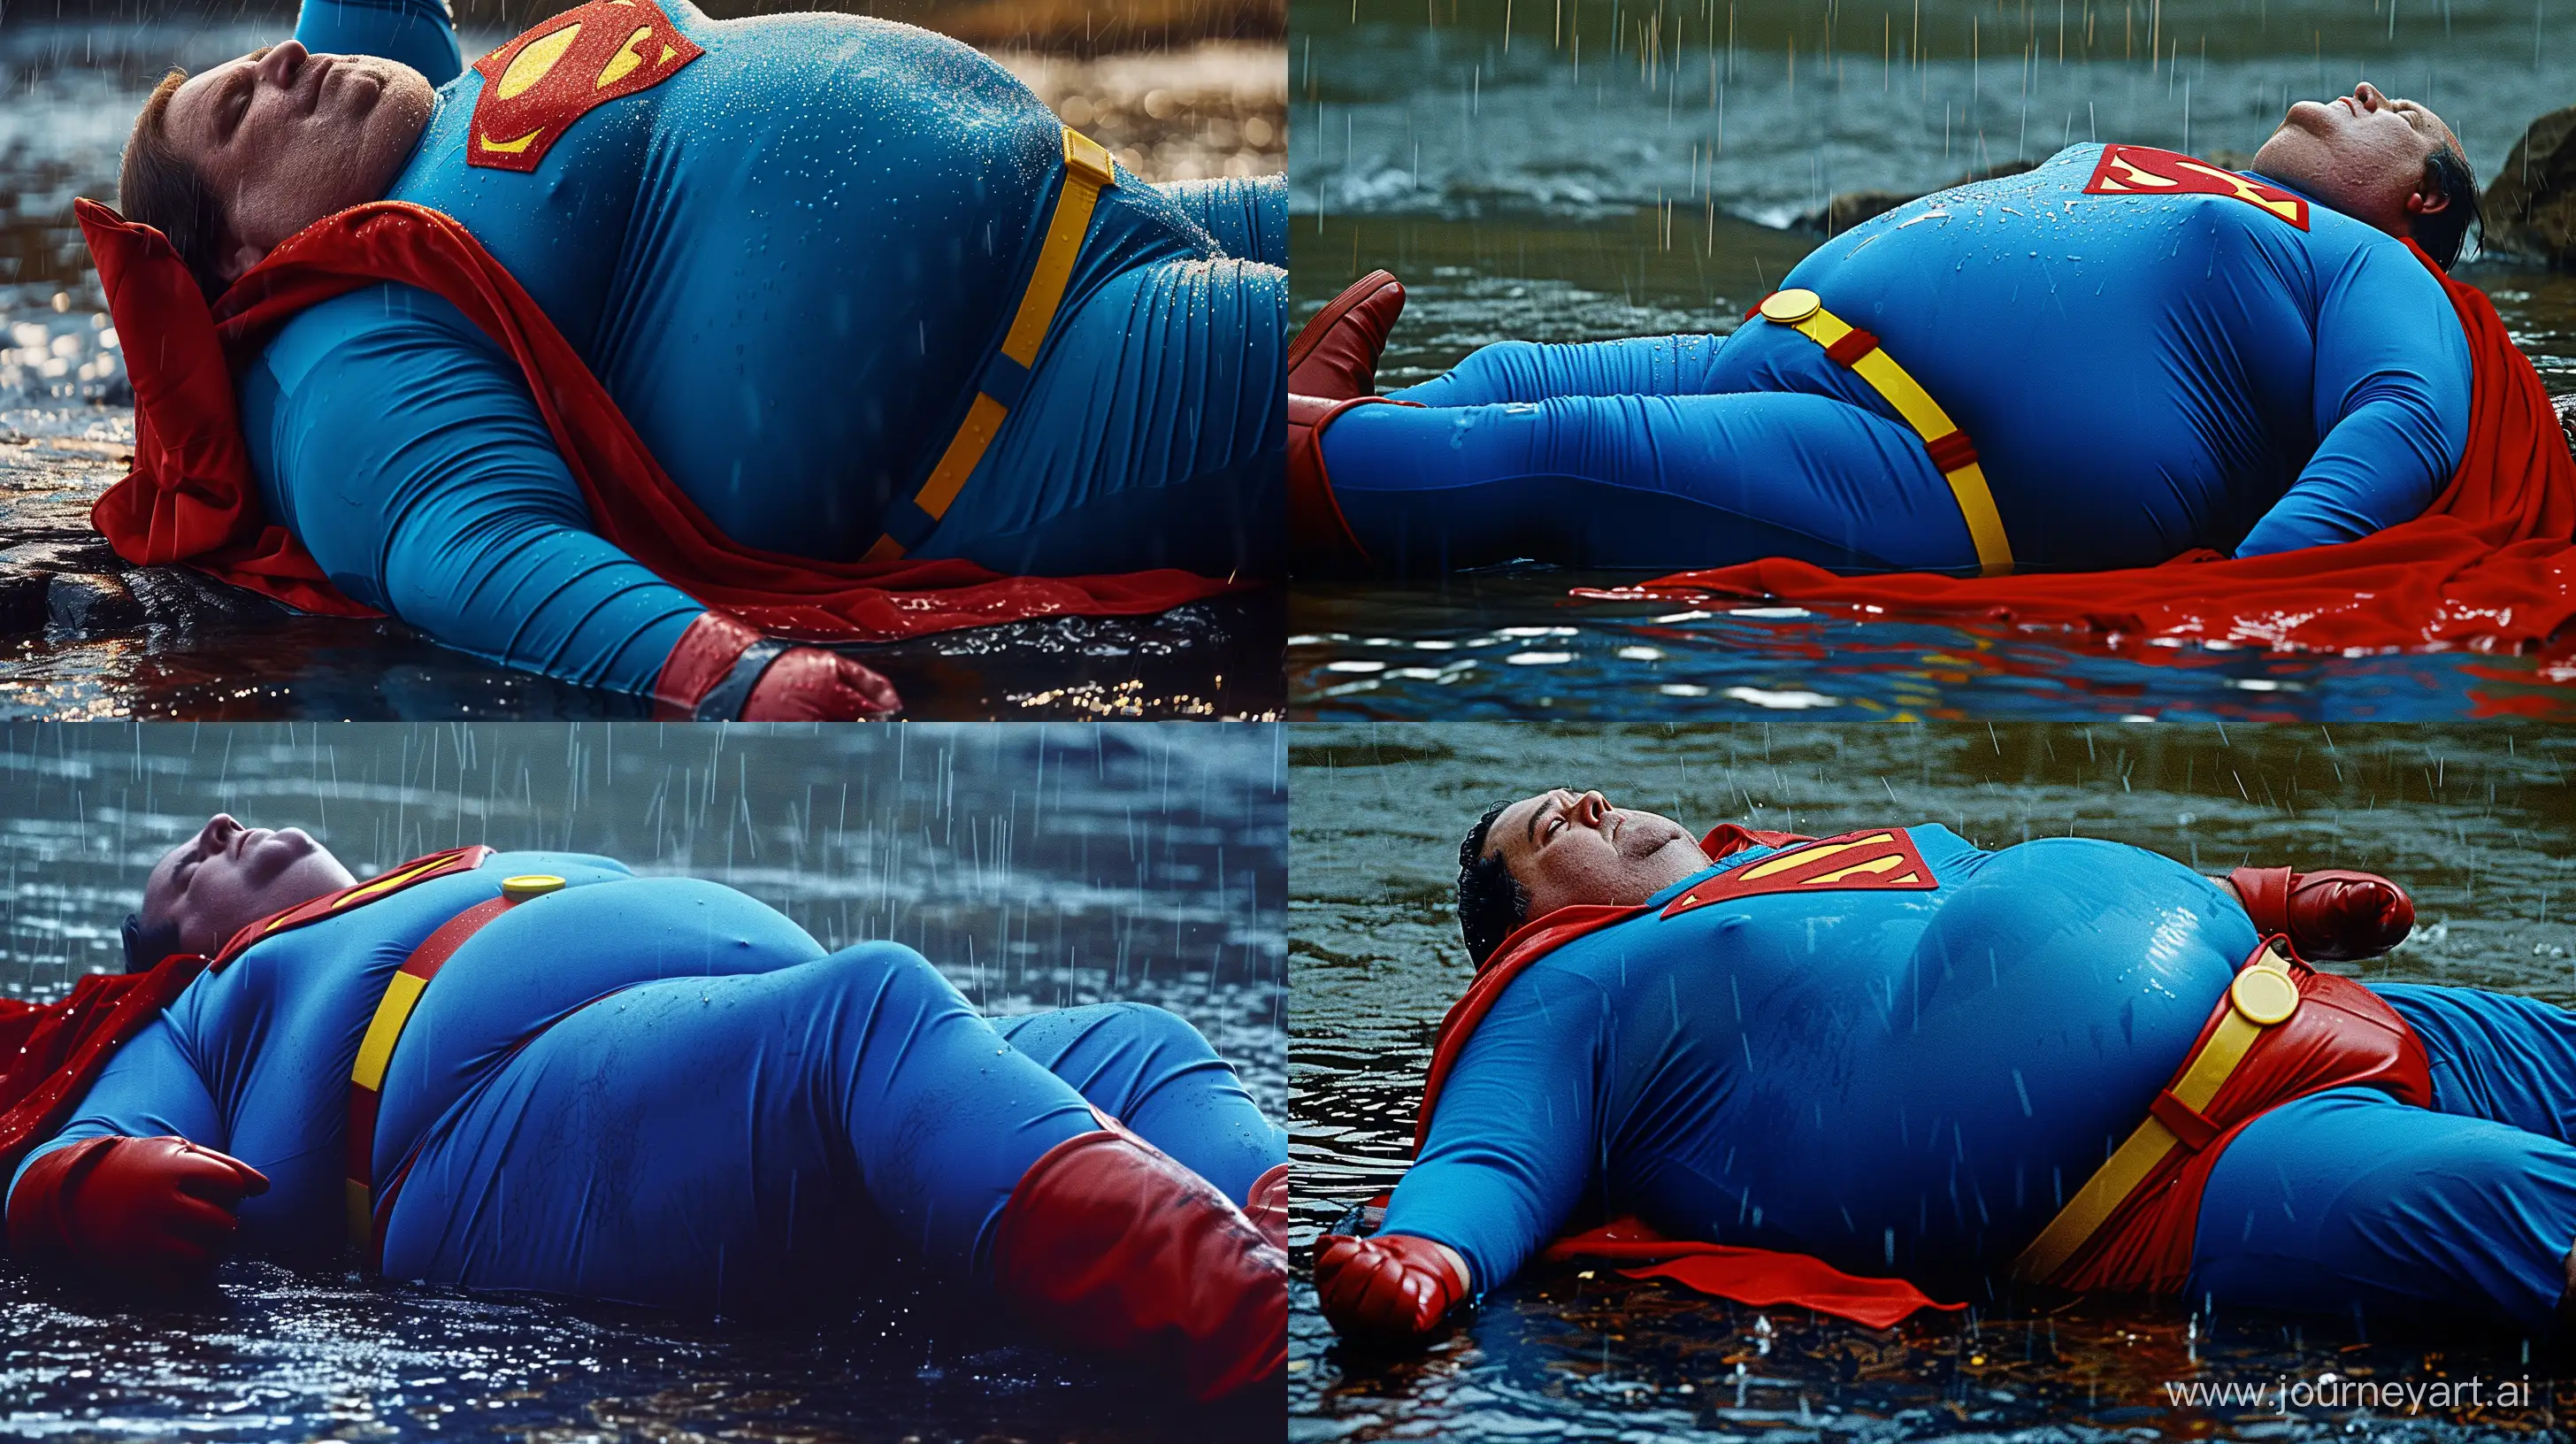 Elderly-Superman-Enjoys-Rainy-Day-by-the-River-in-1978-Costume